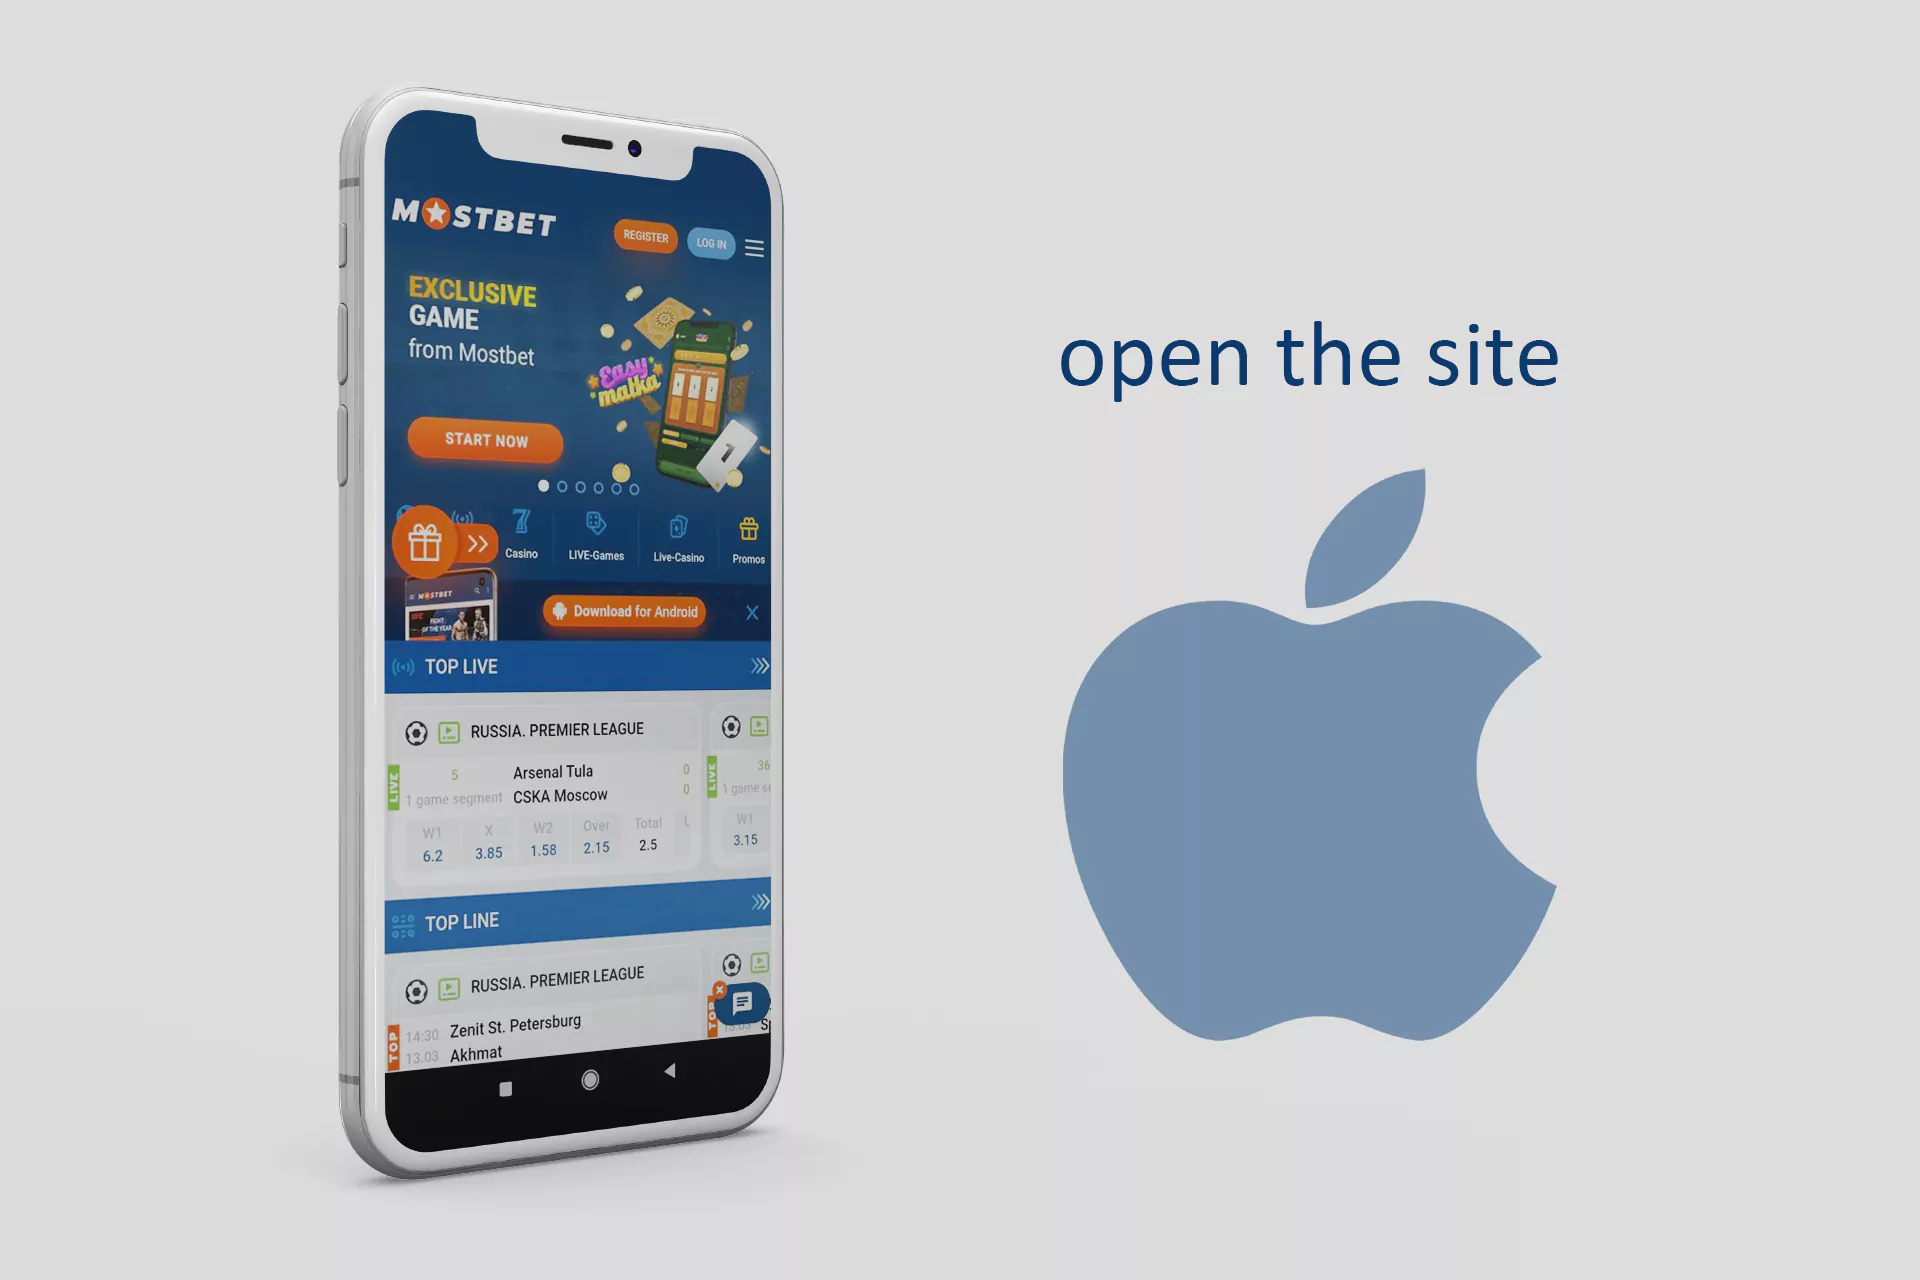 Open the official site of Mostbet in the mobile browser on your iPhone.